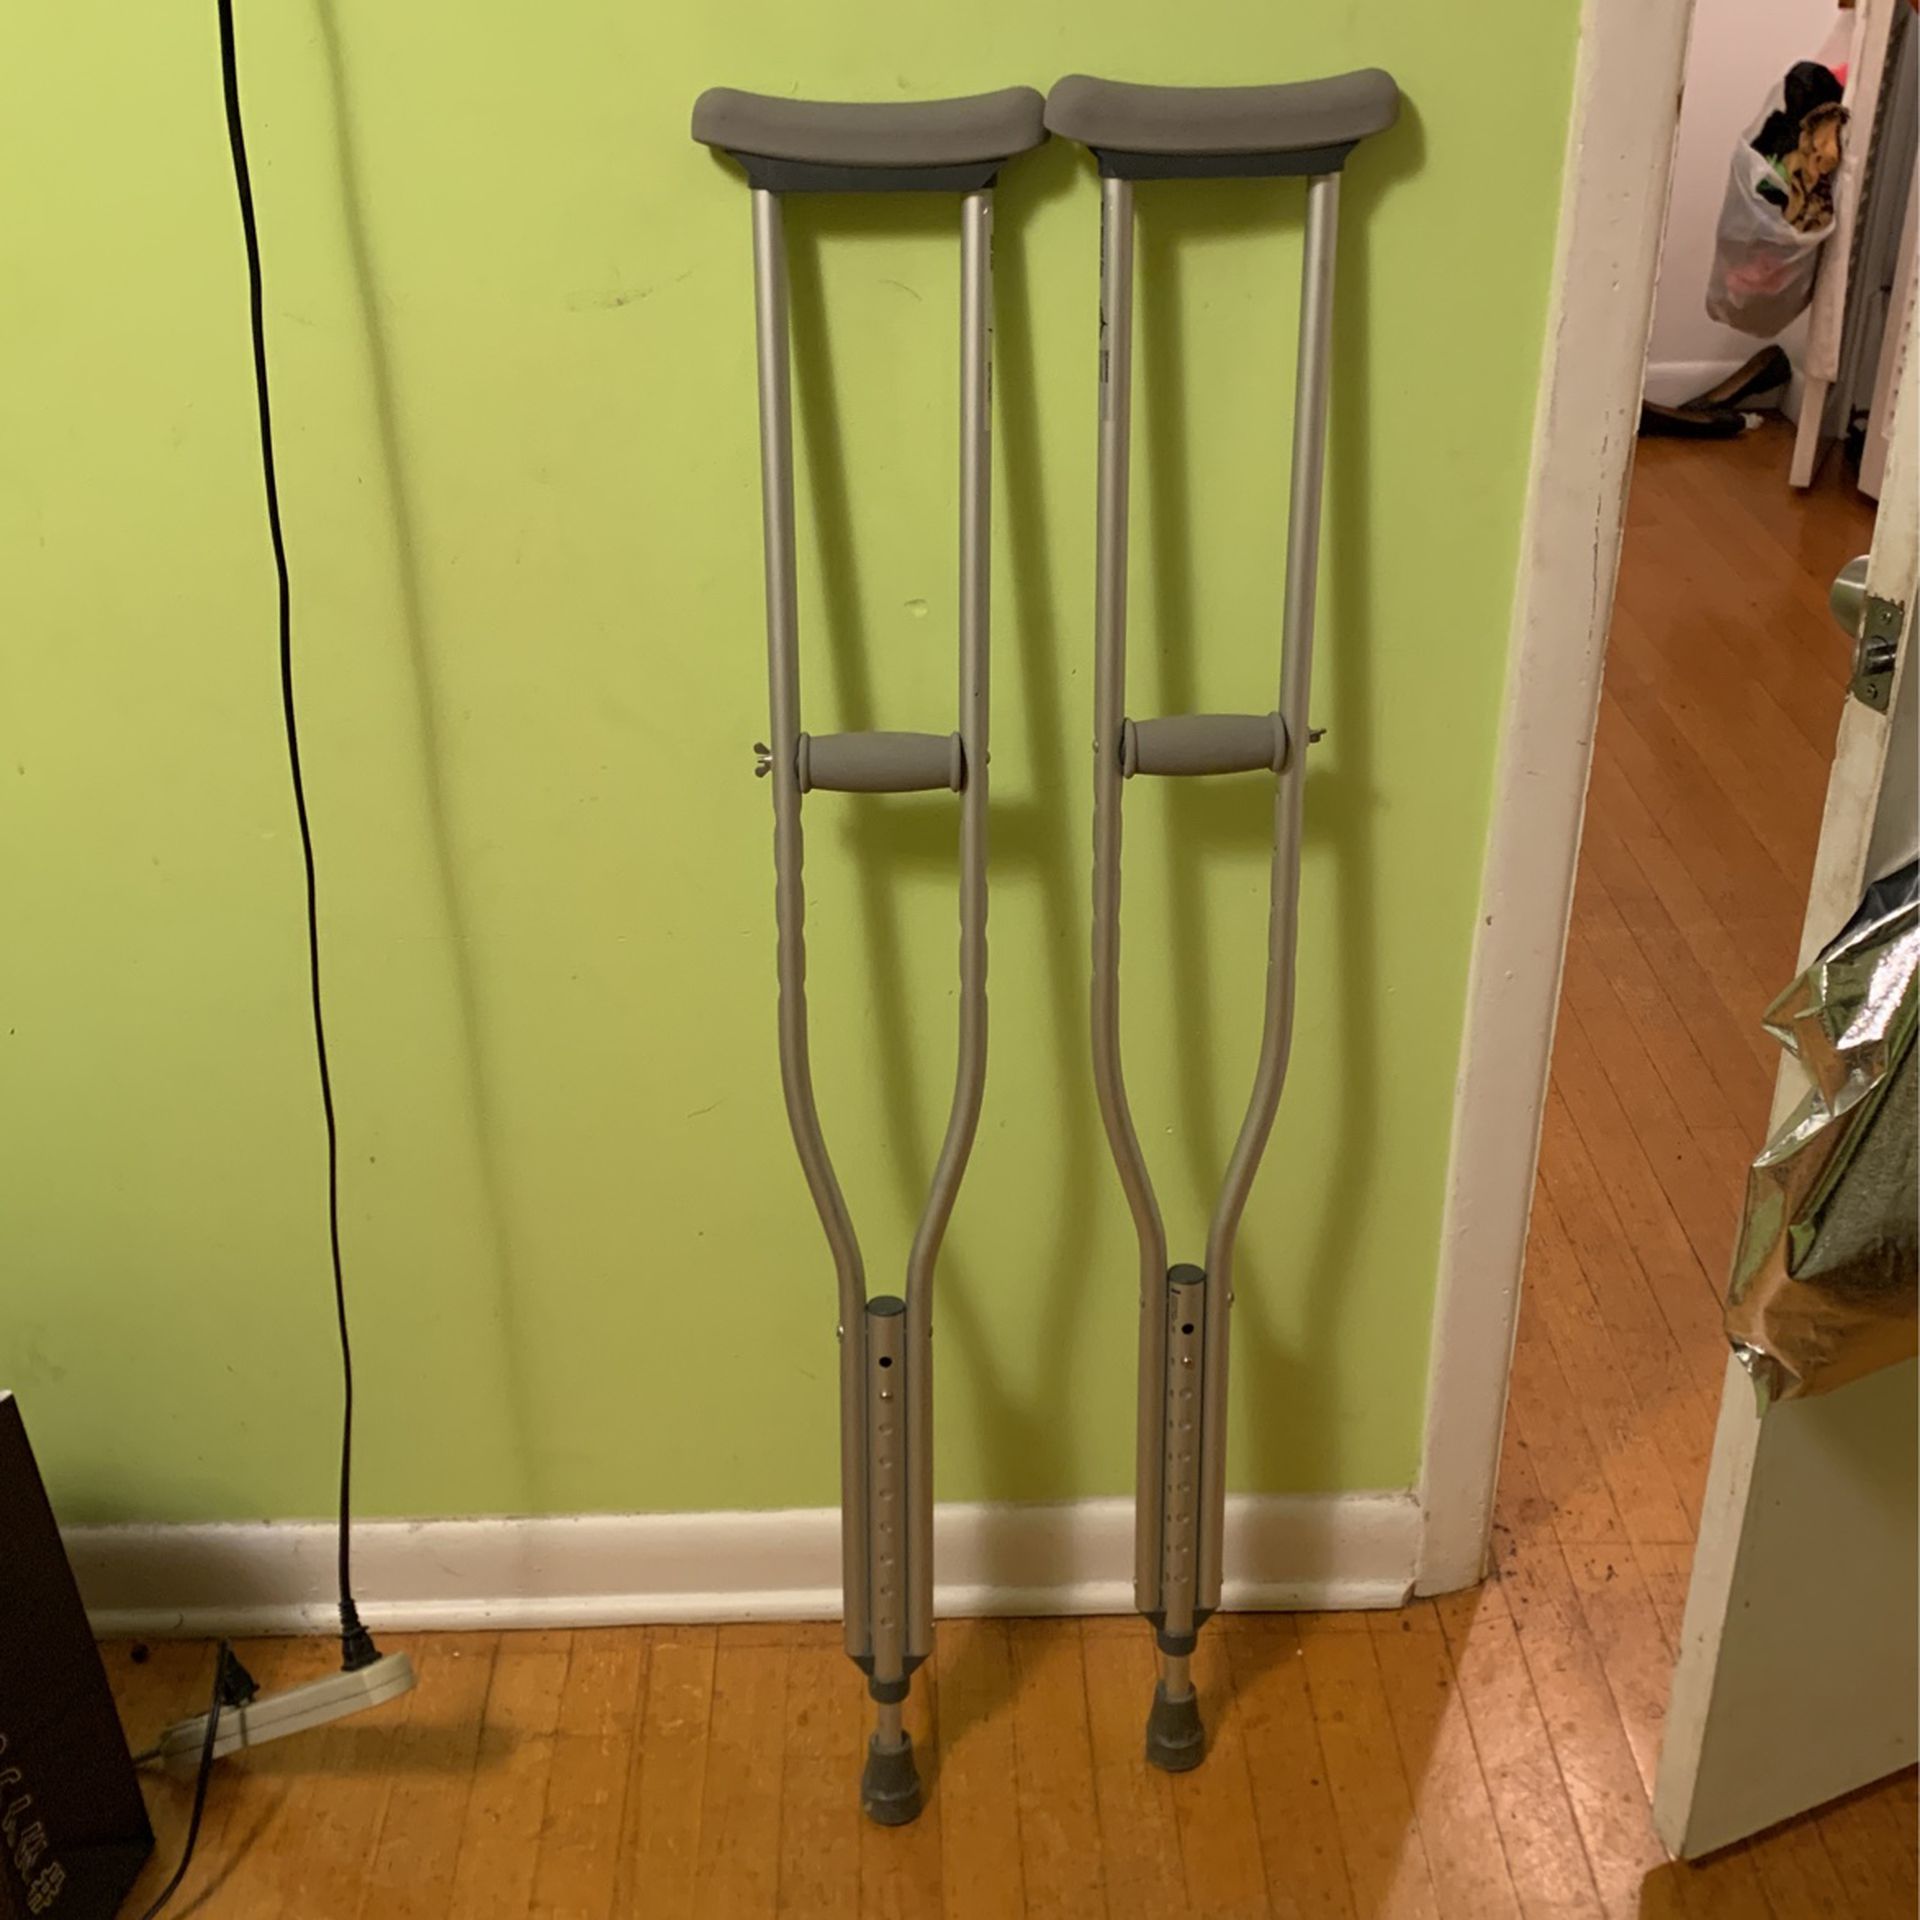 CRUTCHES $35 5’2”-5’10” ‼️ SILVER SPRING MD NEED GONE